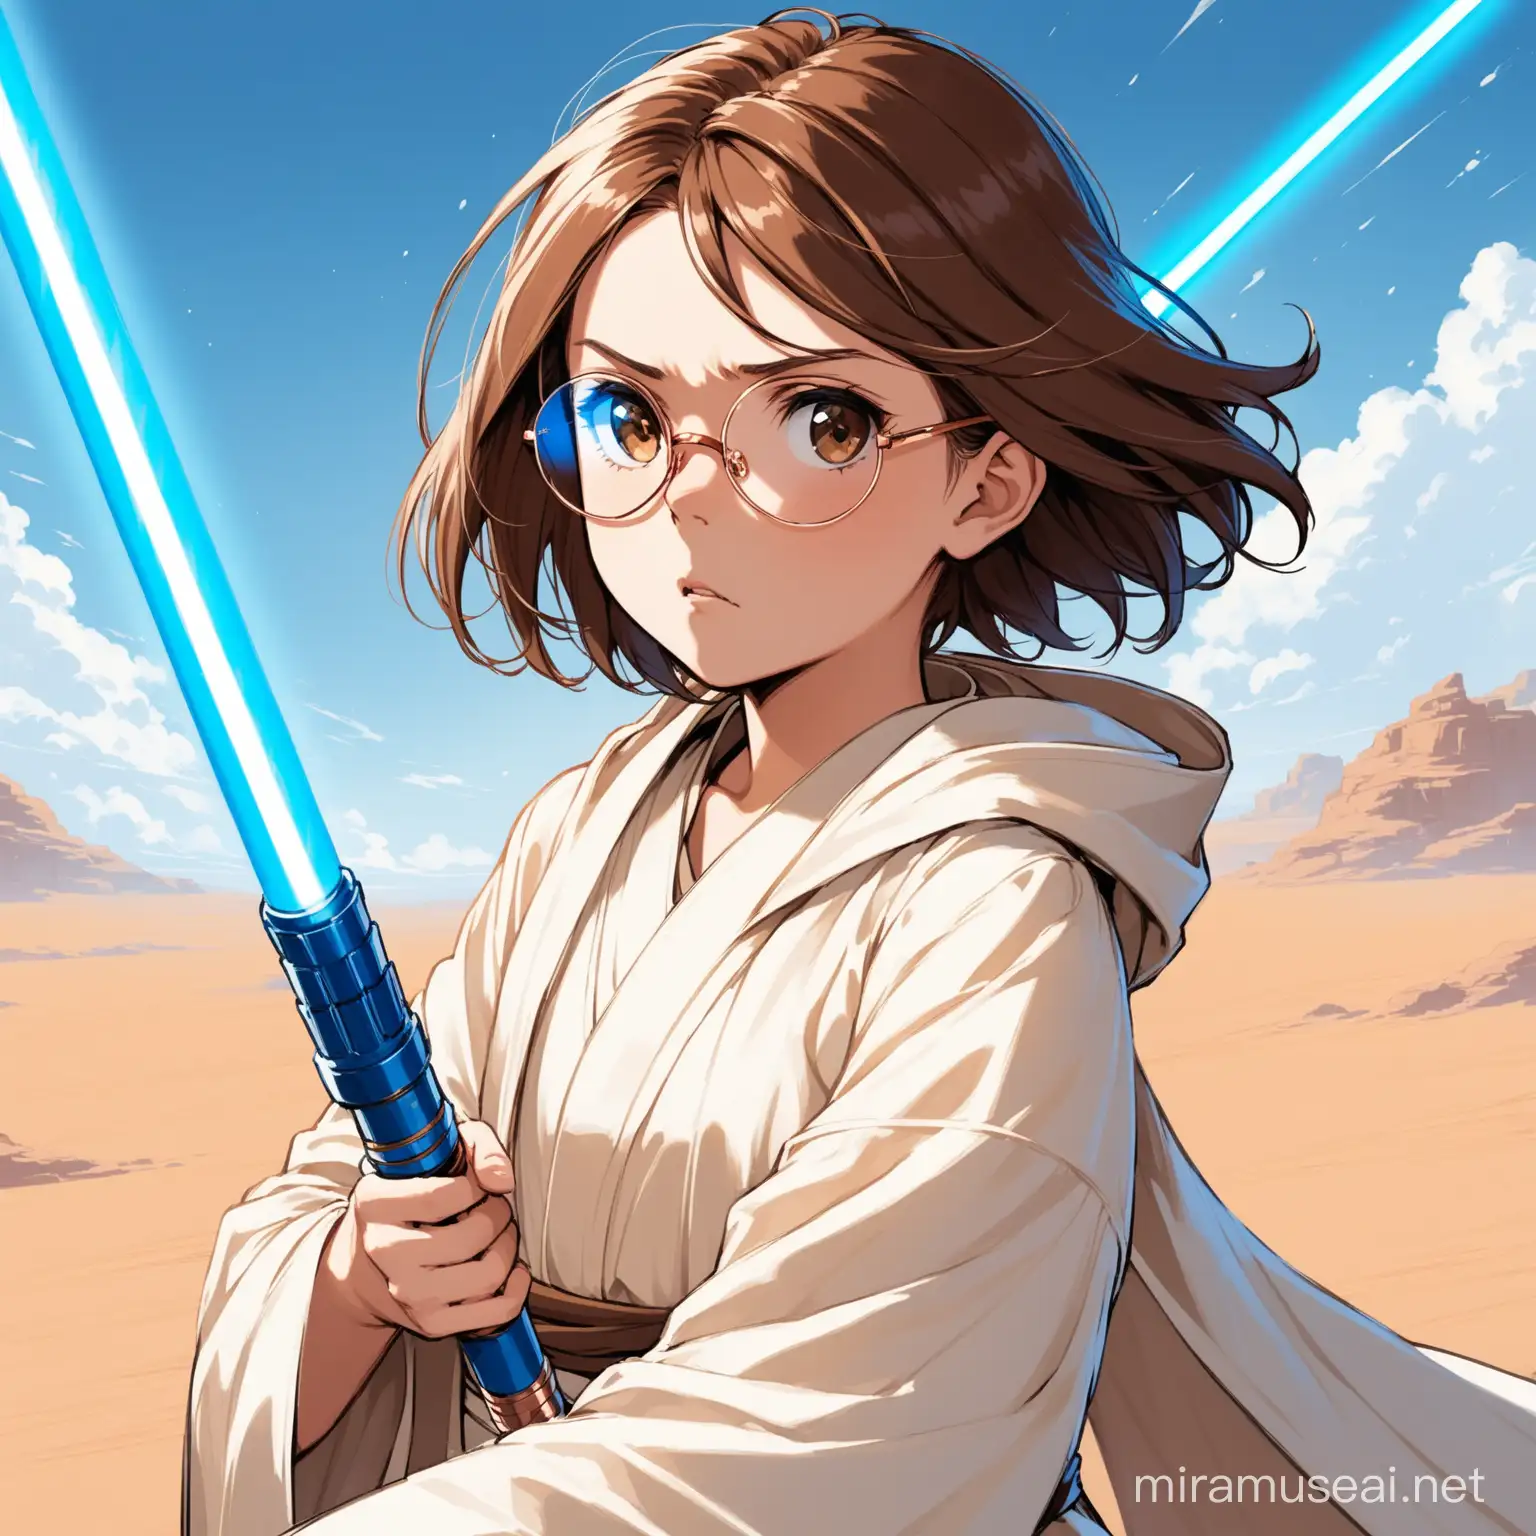 12 year old girl with short brown hair, rose gold glasses, brown eyes, determined expression, white jedi robes, blue lightsaber, hair blowing in the wind,